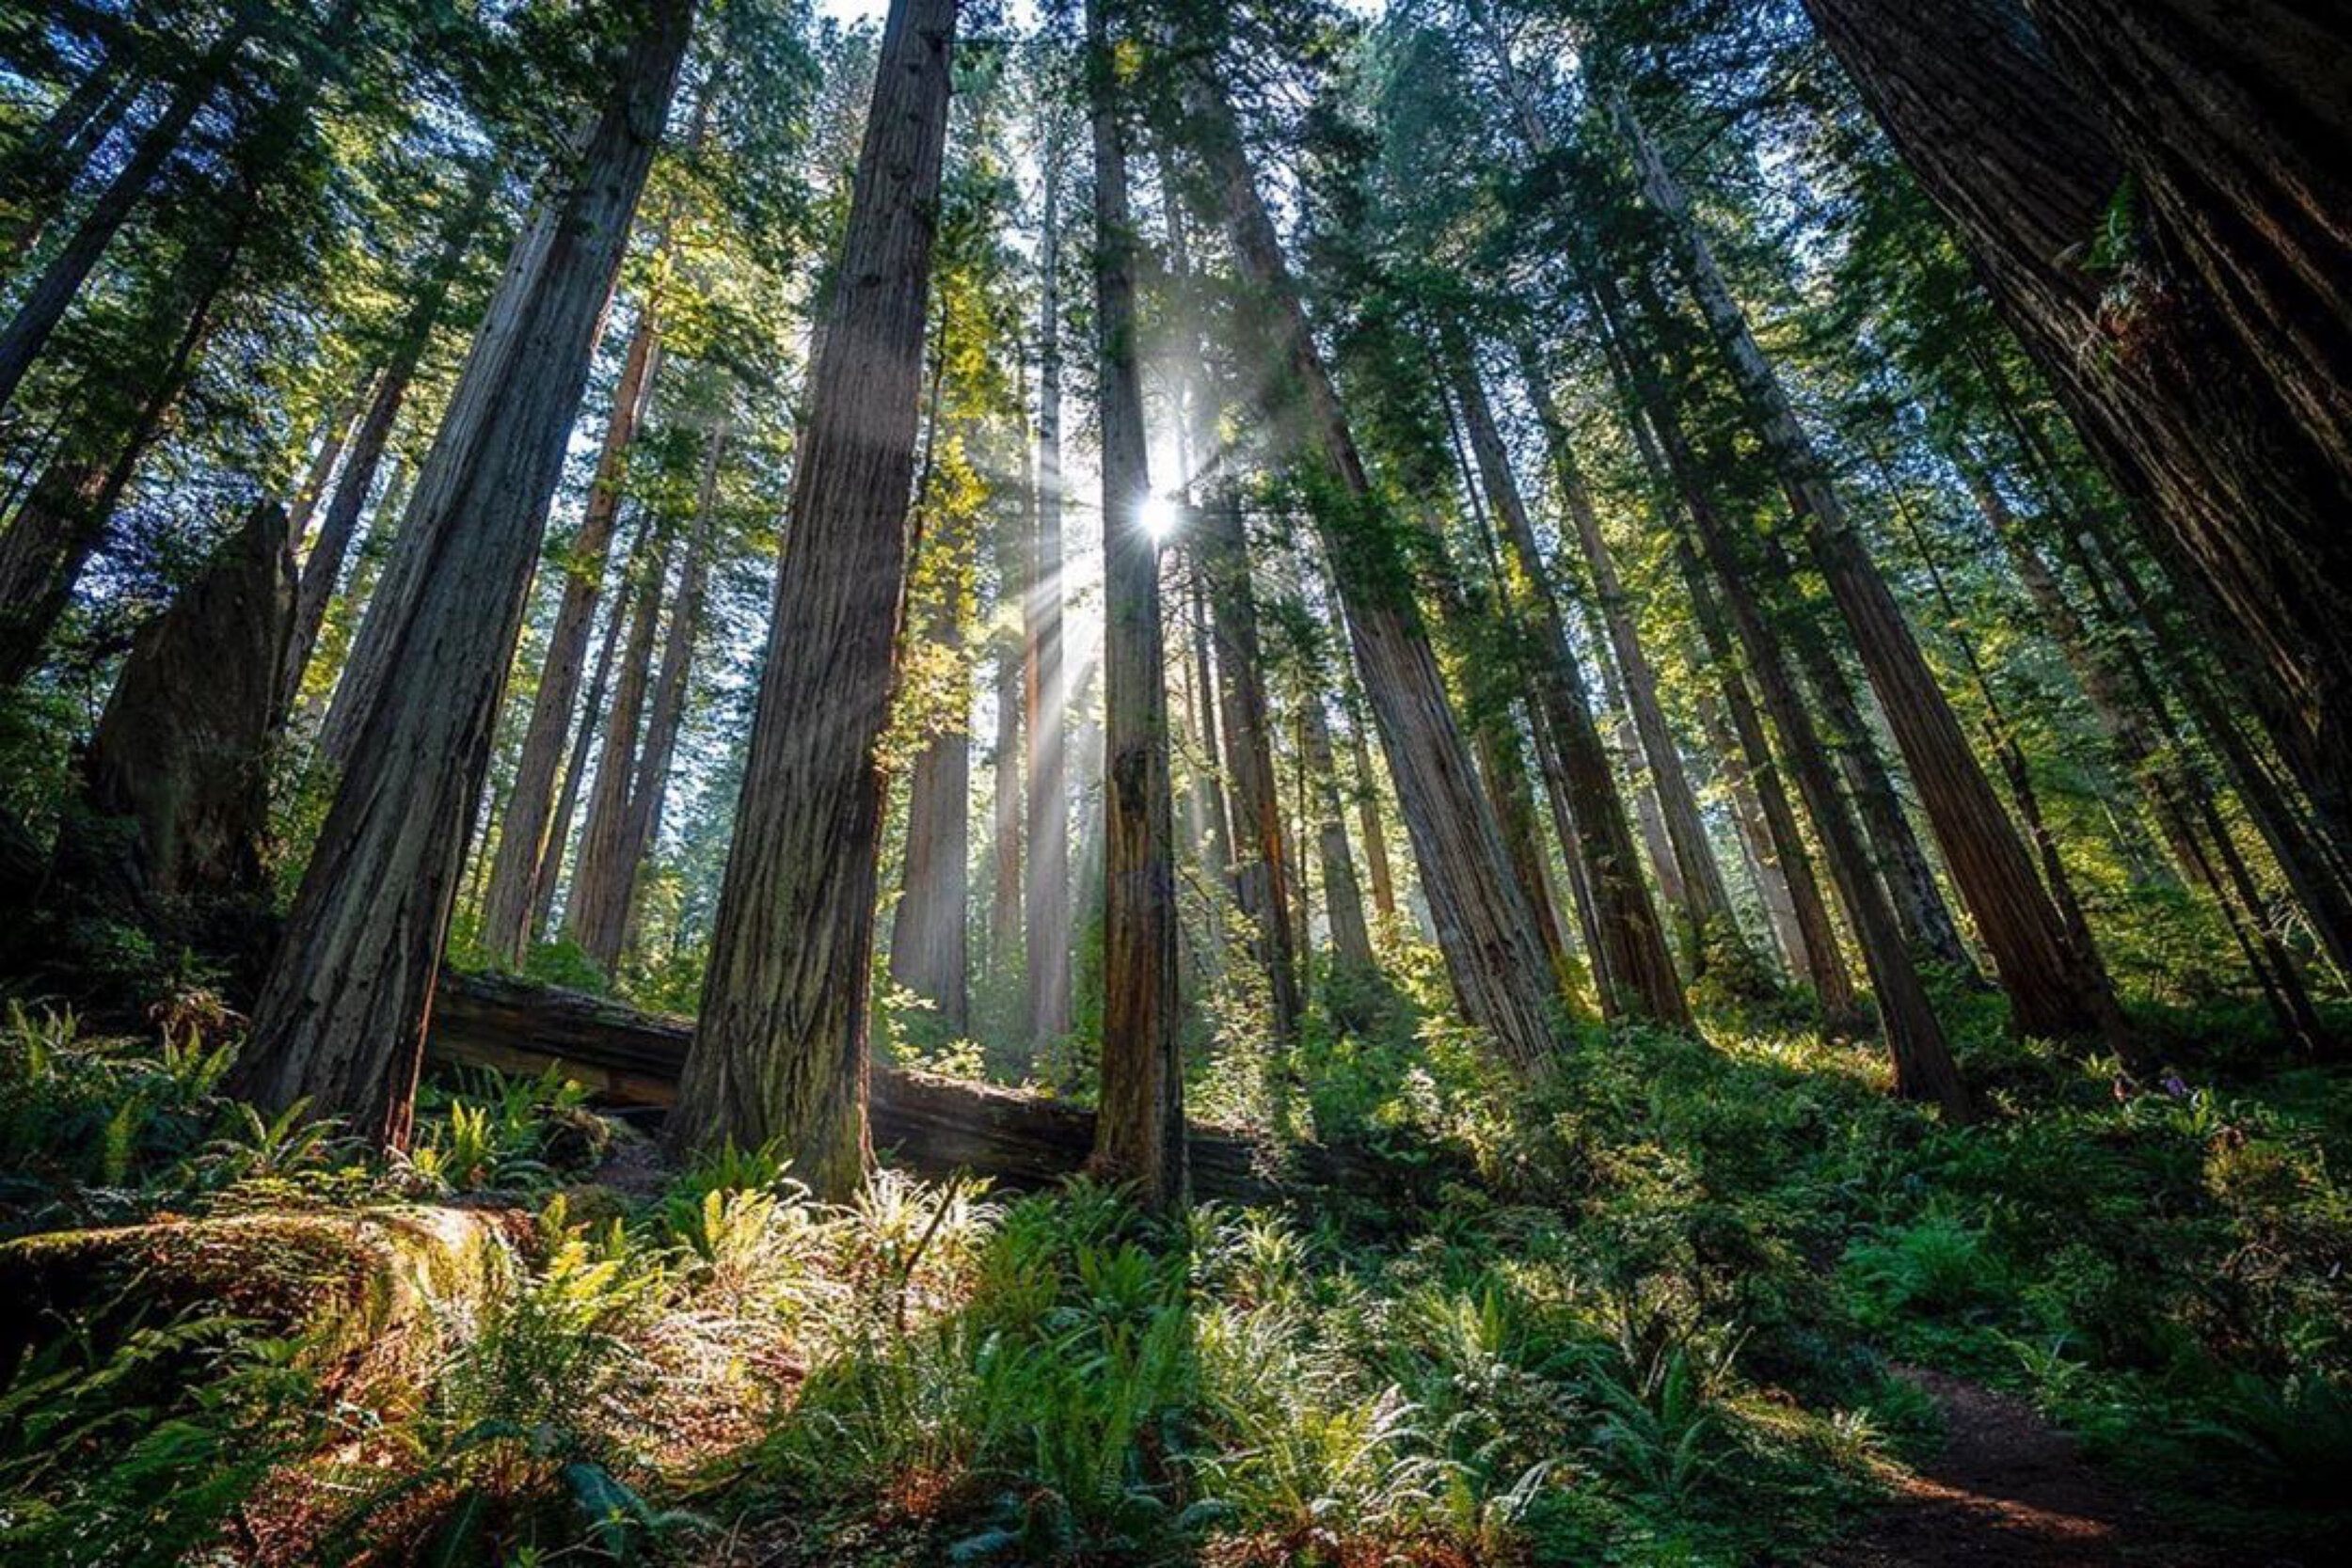 Starburst Light Rays in Redwoods by Photography Workshop Student